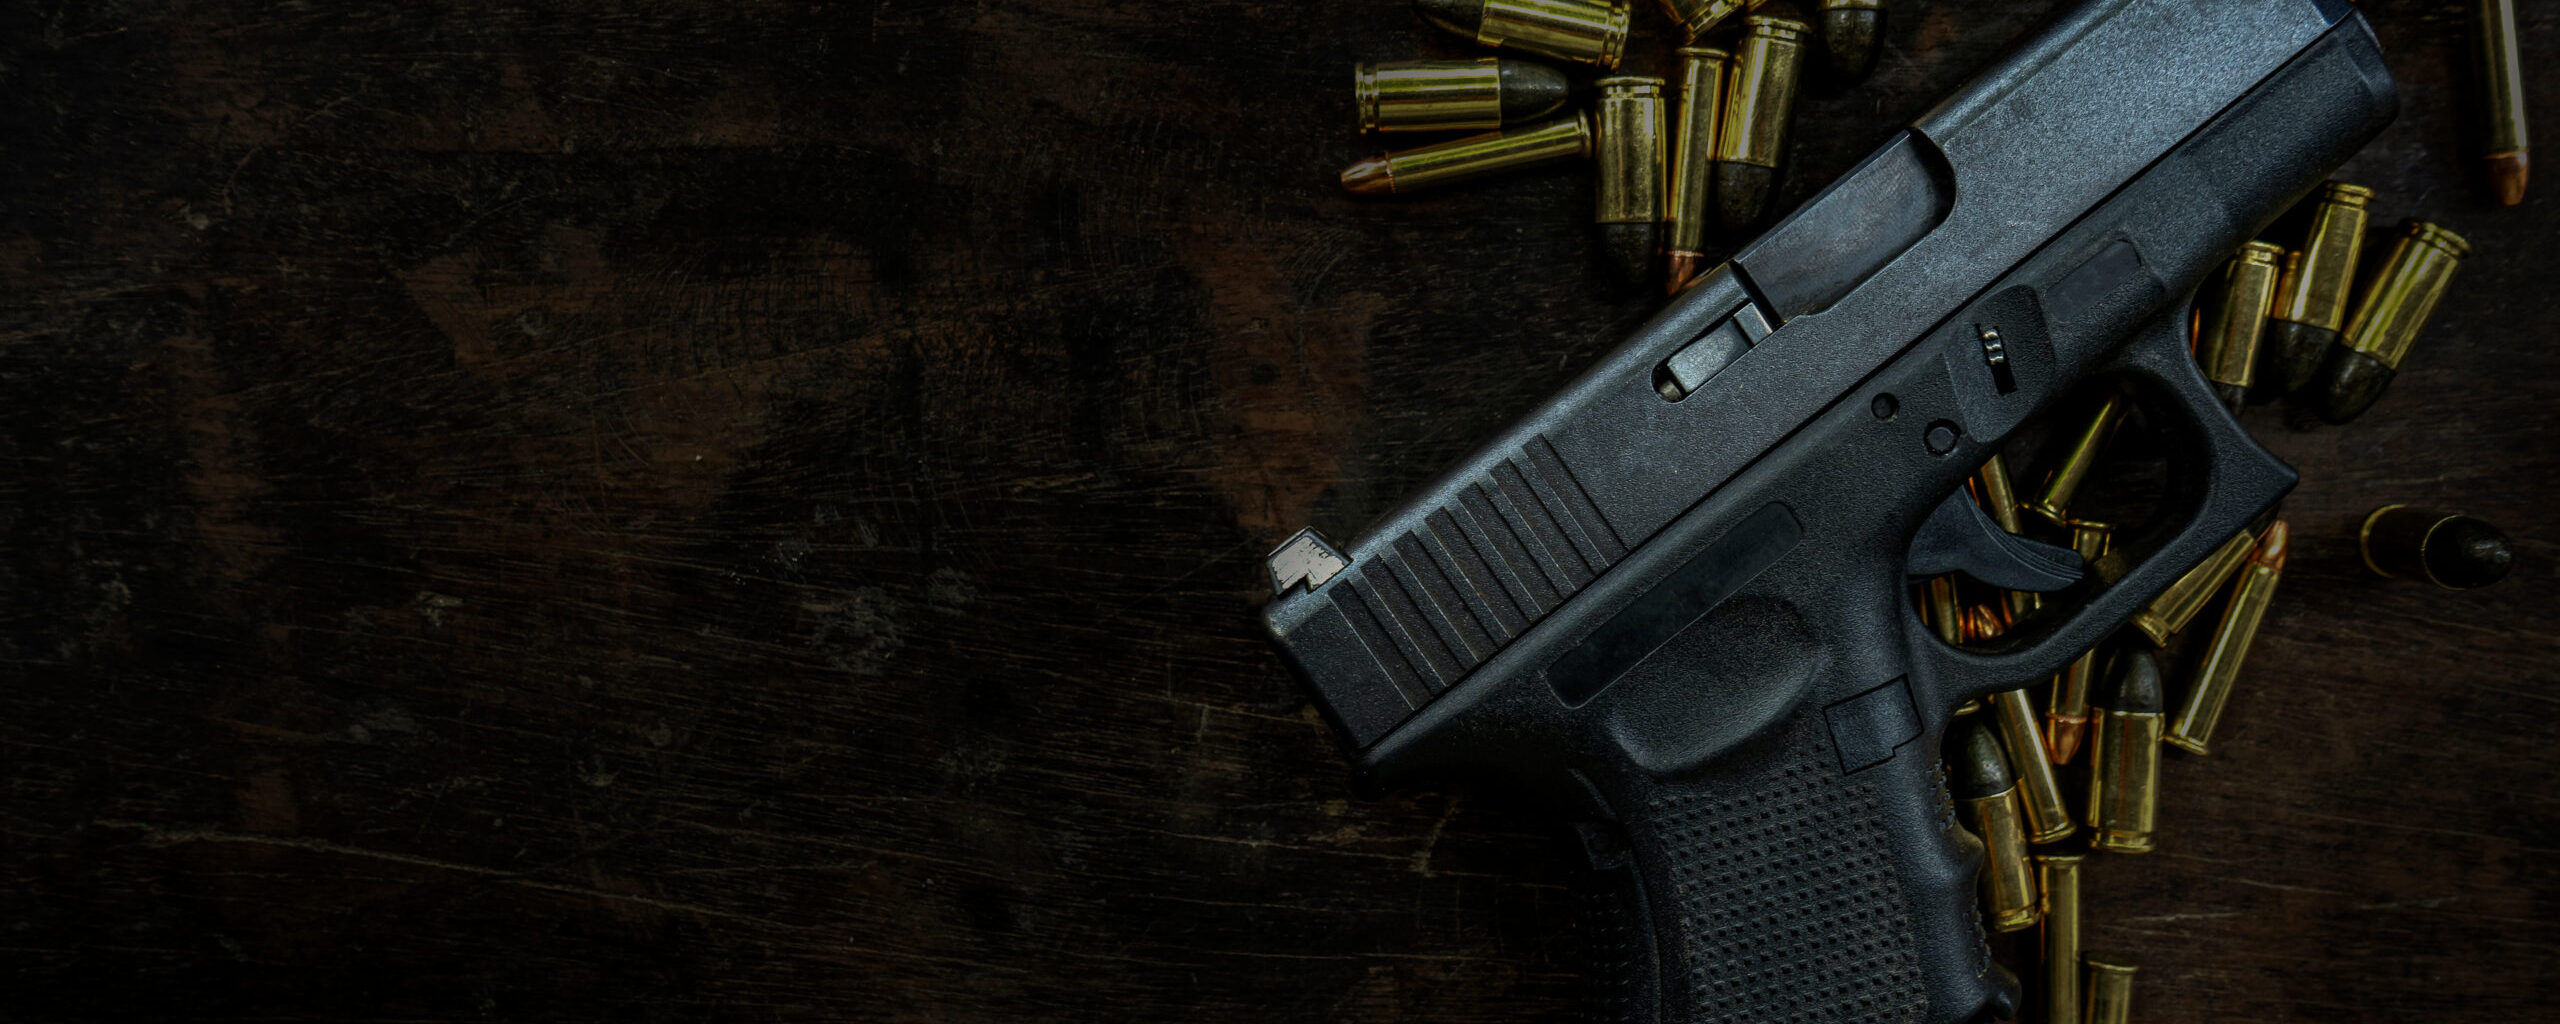 AGA Weekly Community News | Everytown for Gun Safety